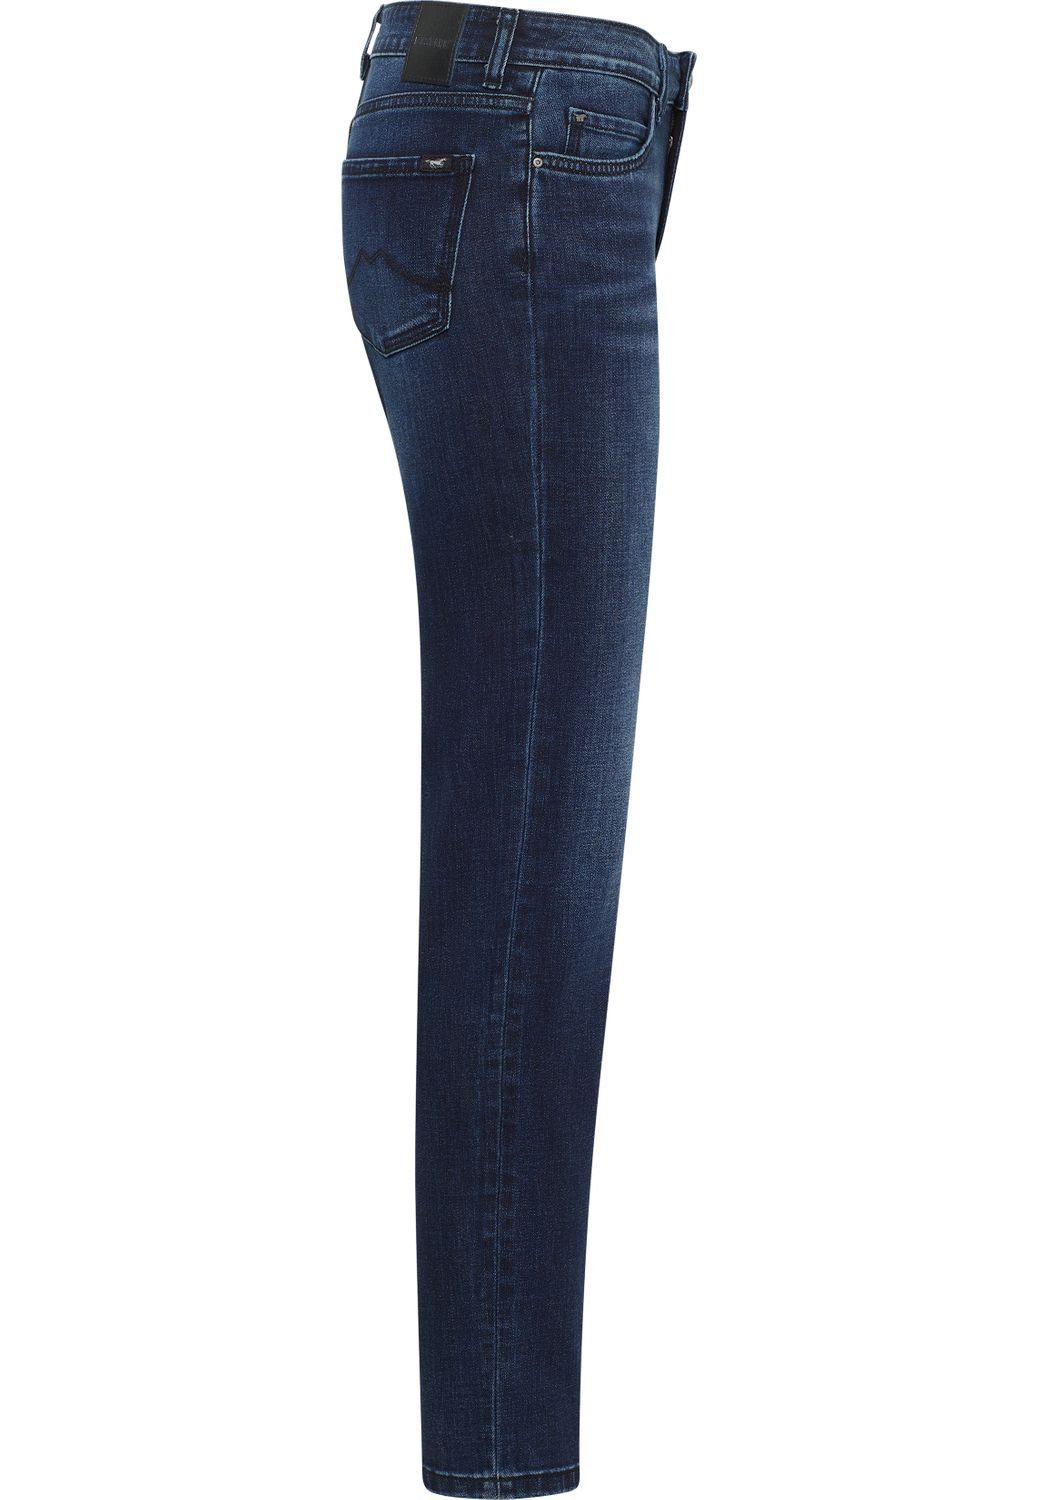 CROSBY Stretch MUSTANG Relax-fit-Jeans mit